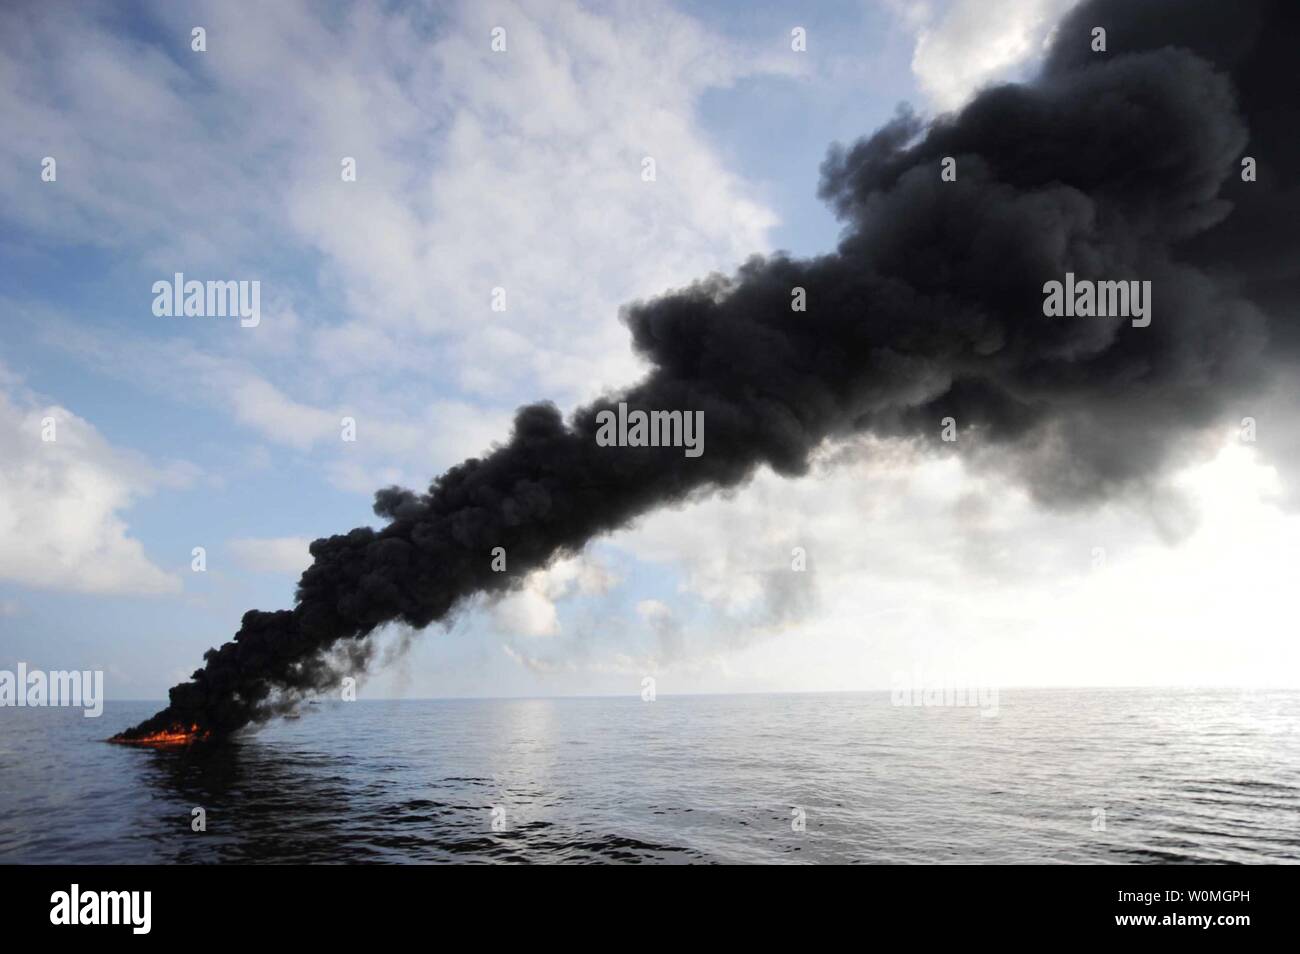 Dark clouds of smoke and fire emerge as oil burns during a controlled fire in the Gulf of Mexico, May 5, 2010.  The 'in situ burn' was conducted by contracted fishing vessels working in partnership with the U.S. Coast Guard, BP PLC, and other federal agencies to aid in preventing the spread of oil following last month's explosion on Mobile Offshore Drilling Unit Deepwater Horizon.  UPI/Justin E. Stumberg/US Navy Stock Photo